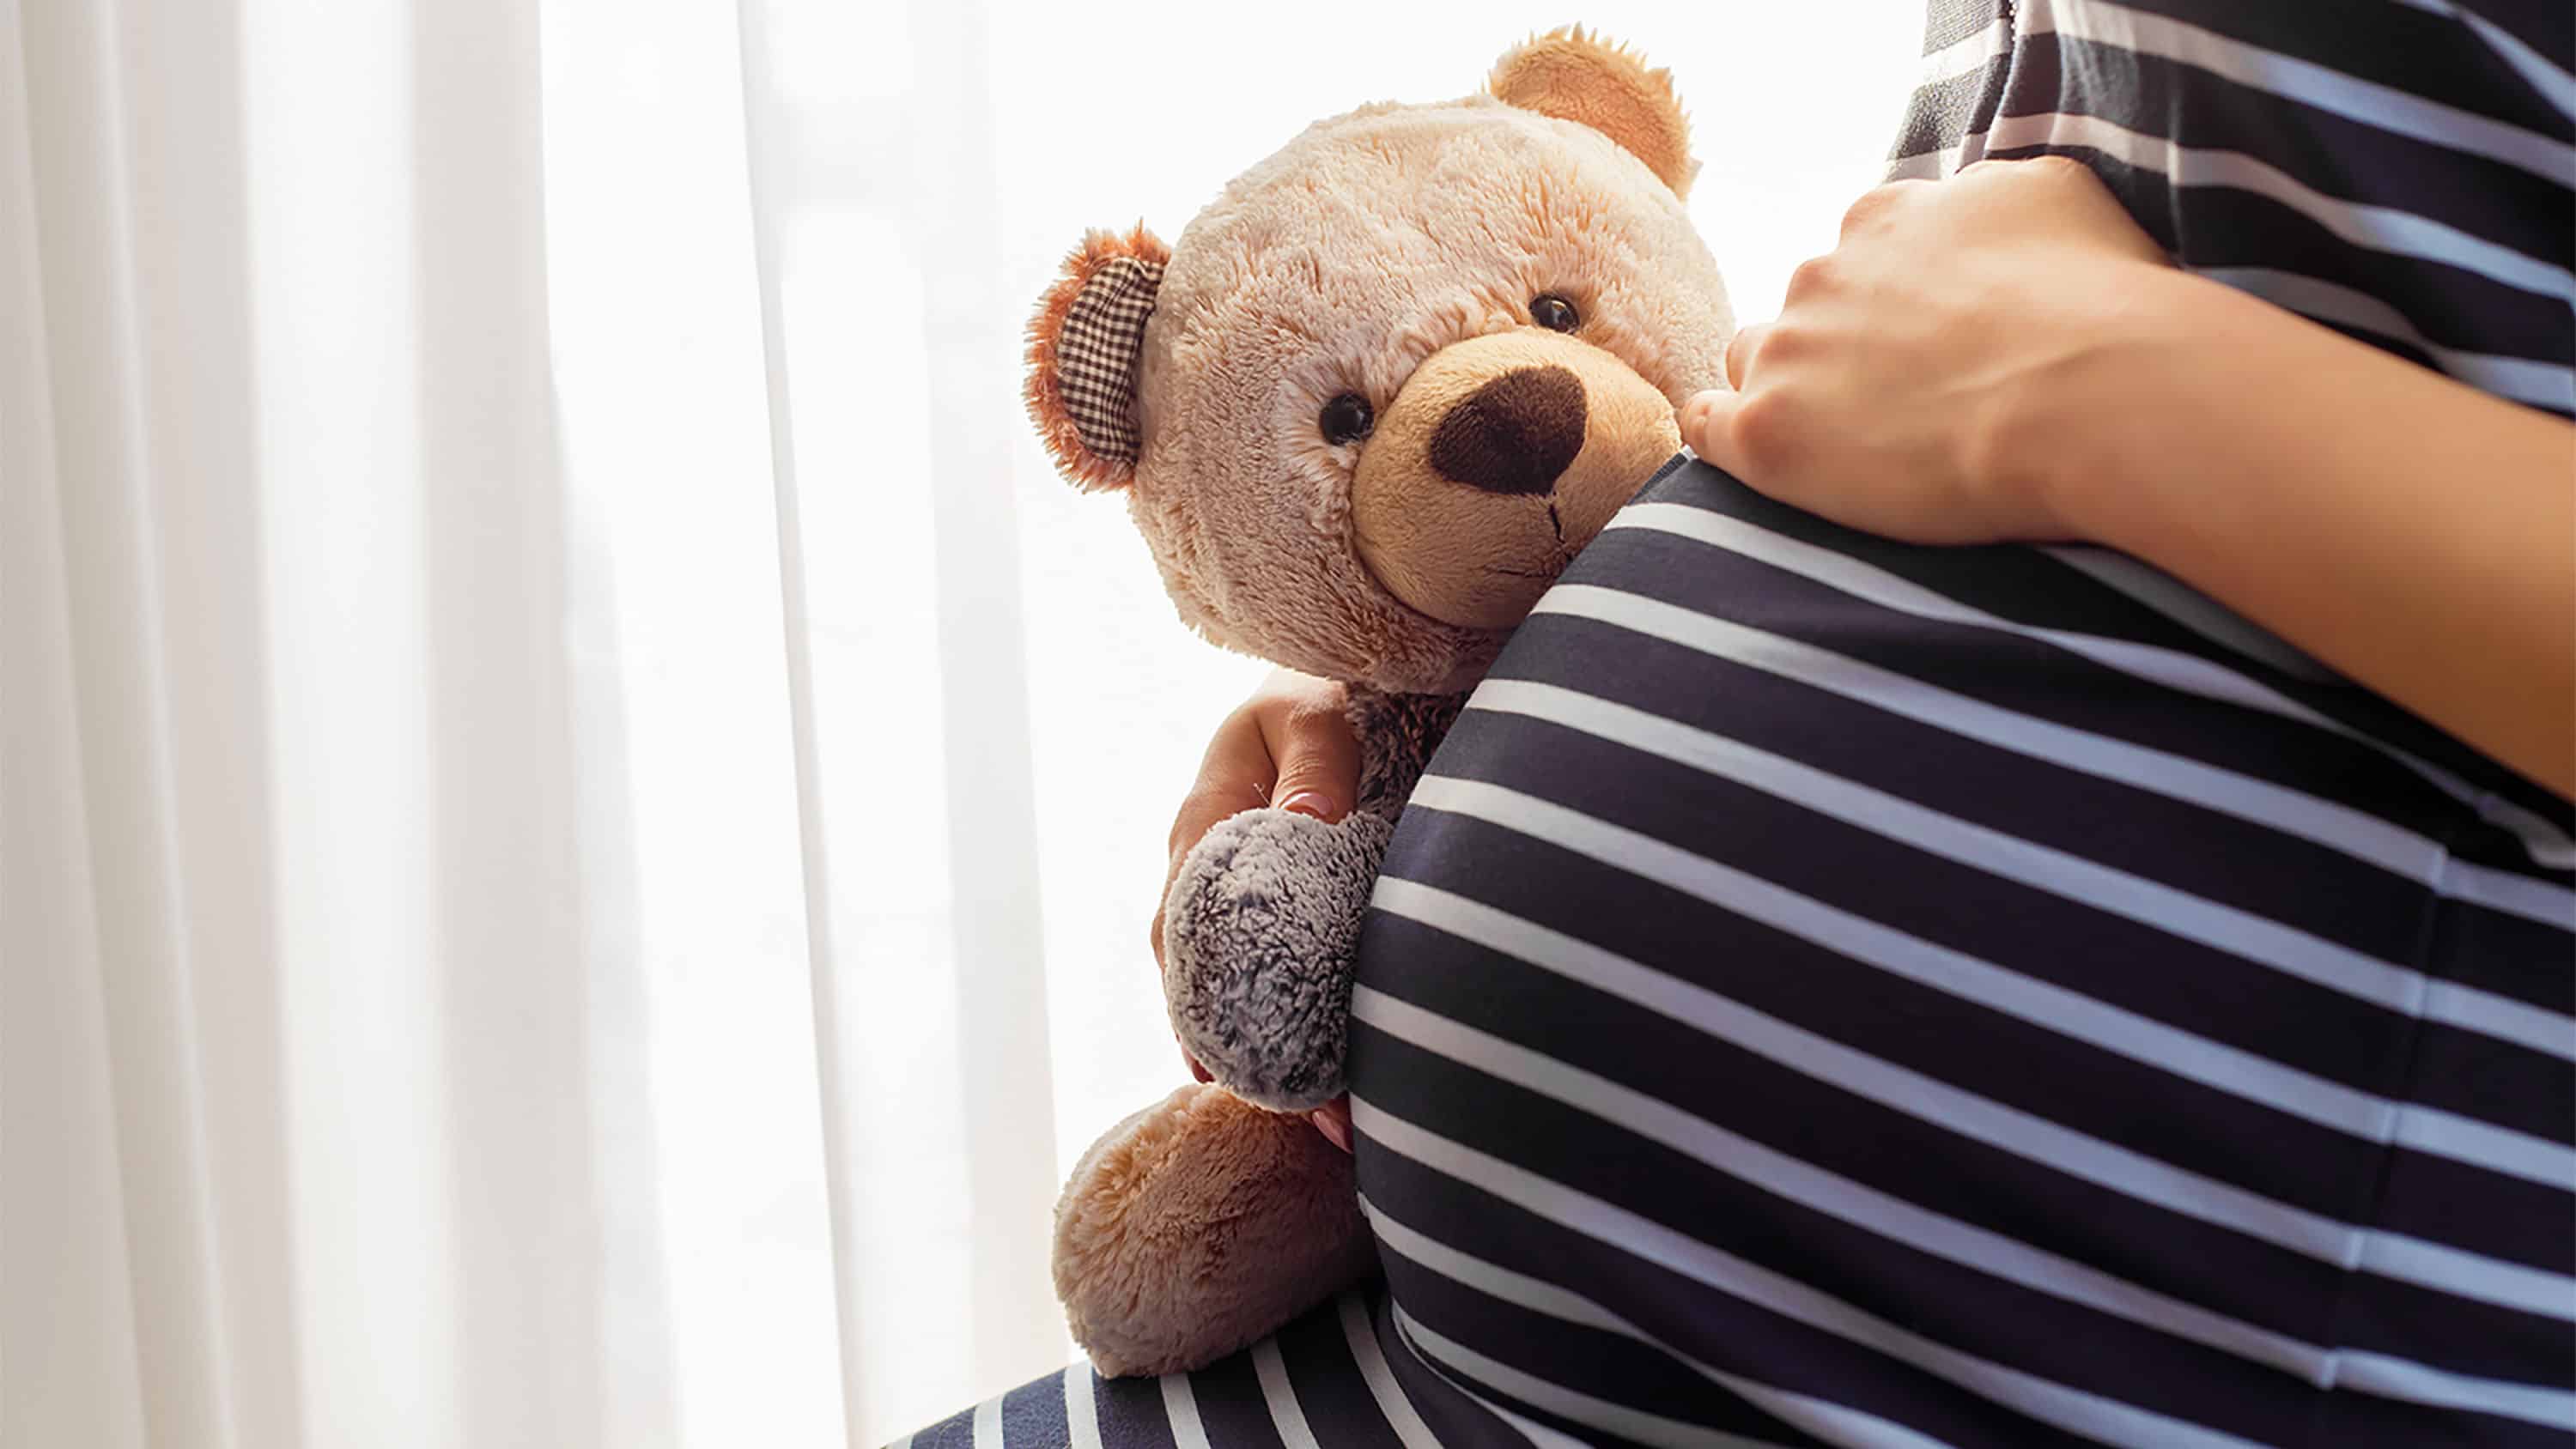 Pregnant woman sitting and holding teddy bear toy